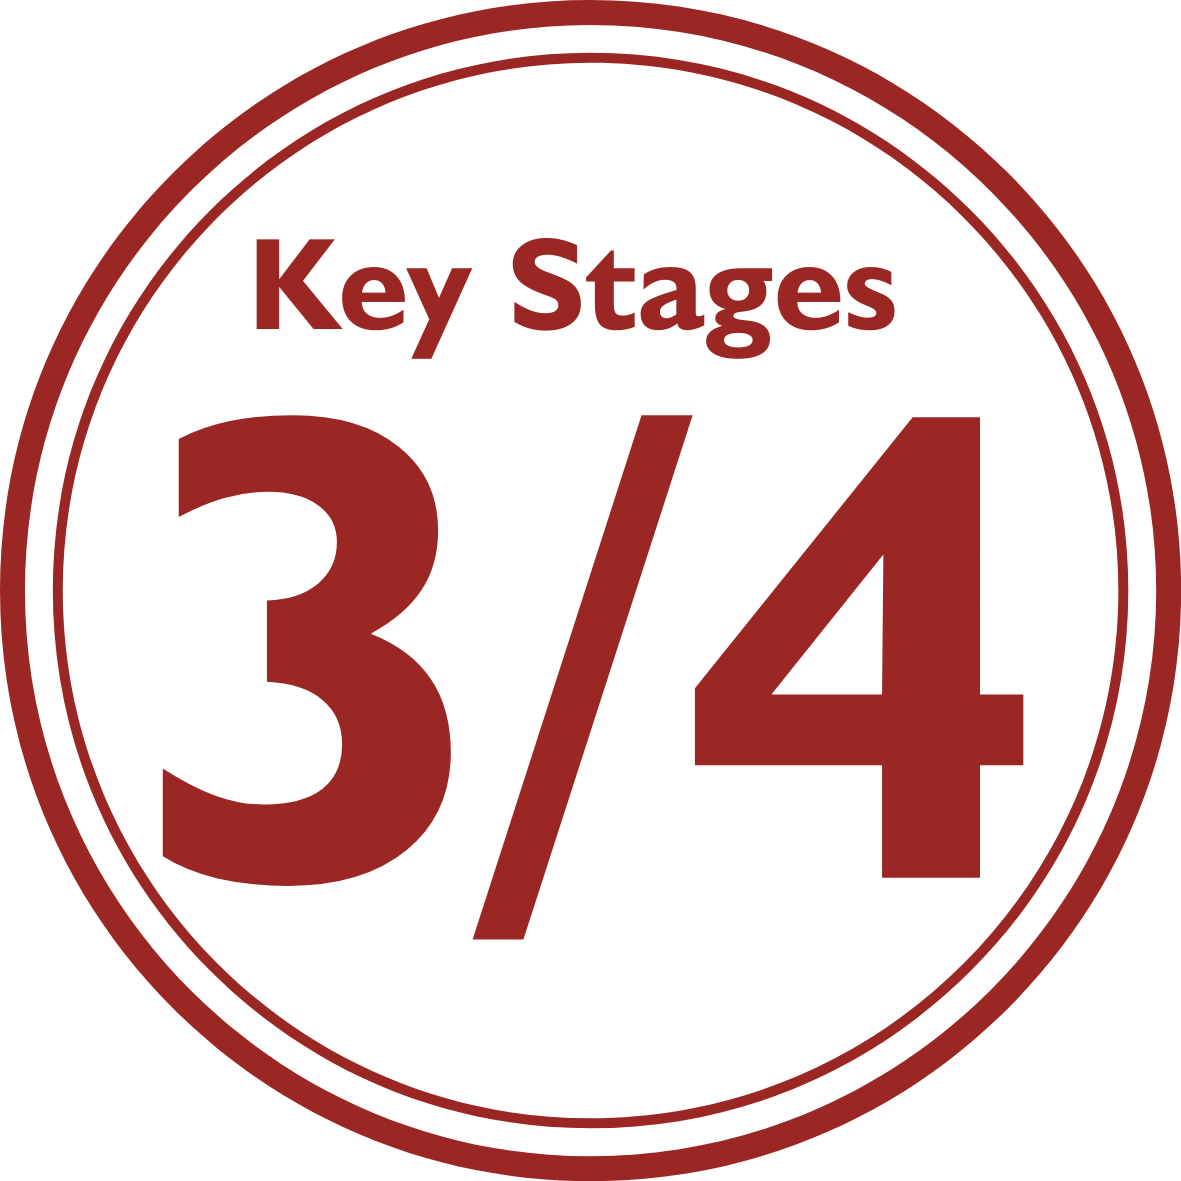 Key Stage 3 and 4 in a circle